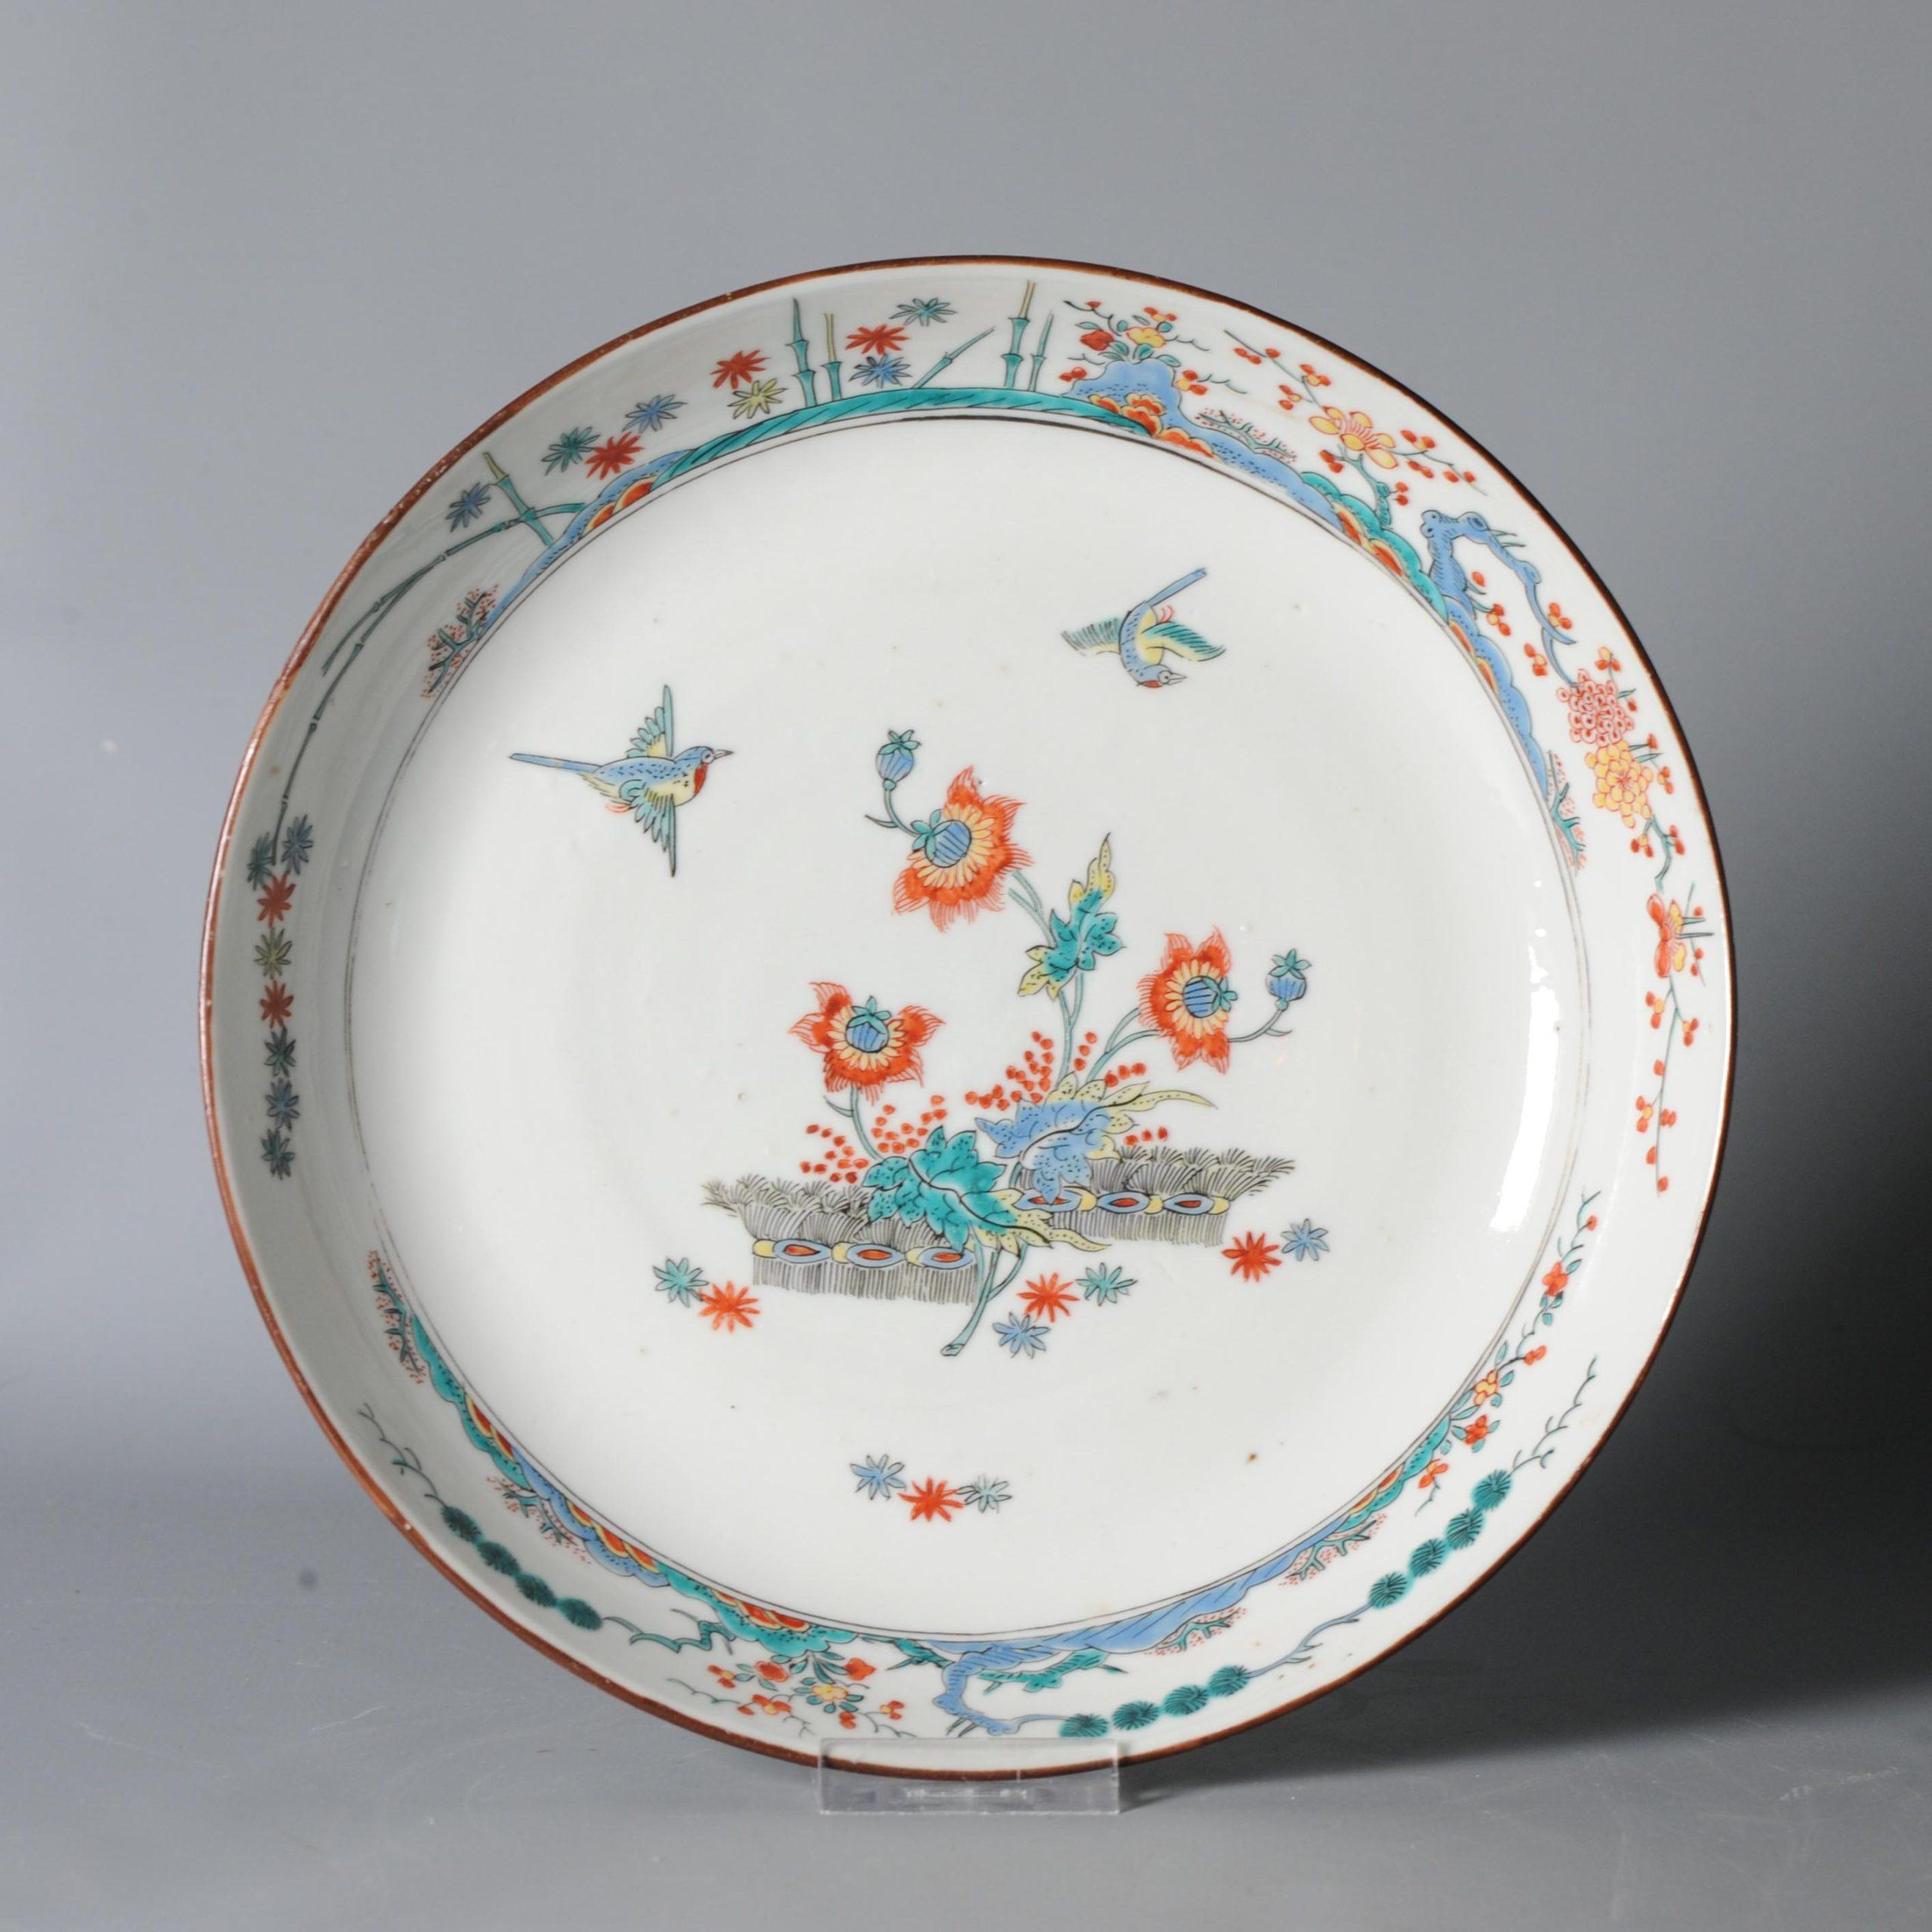 A Japanese Kakiemon-style bird, Birds (magpie) and Three friends of winter dish. Painted by by a Dutch painter to decorate a Chinese porcelain blank.

The scene and quality of painting is amazing.

Three Friends of Winter
These are pine, Prunus